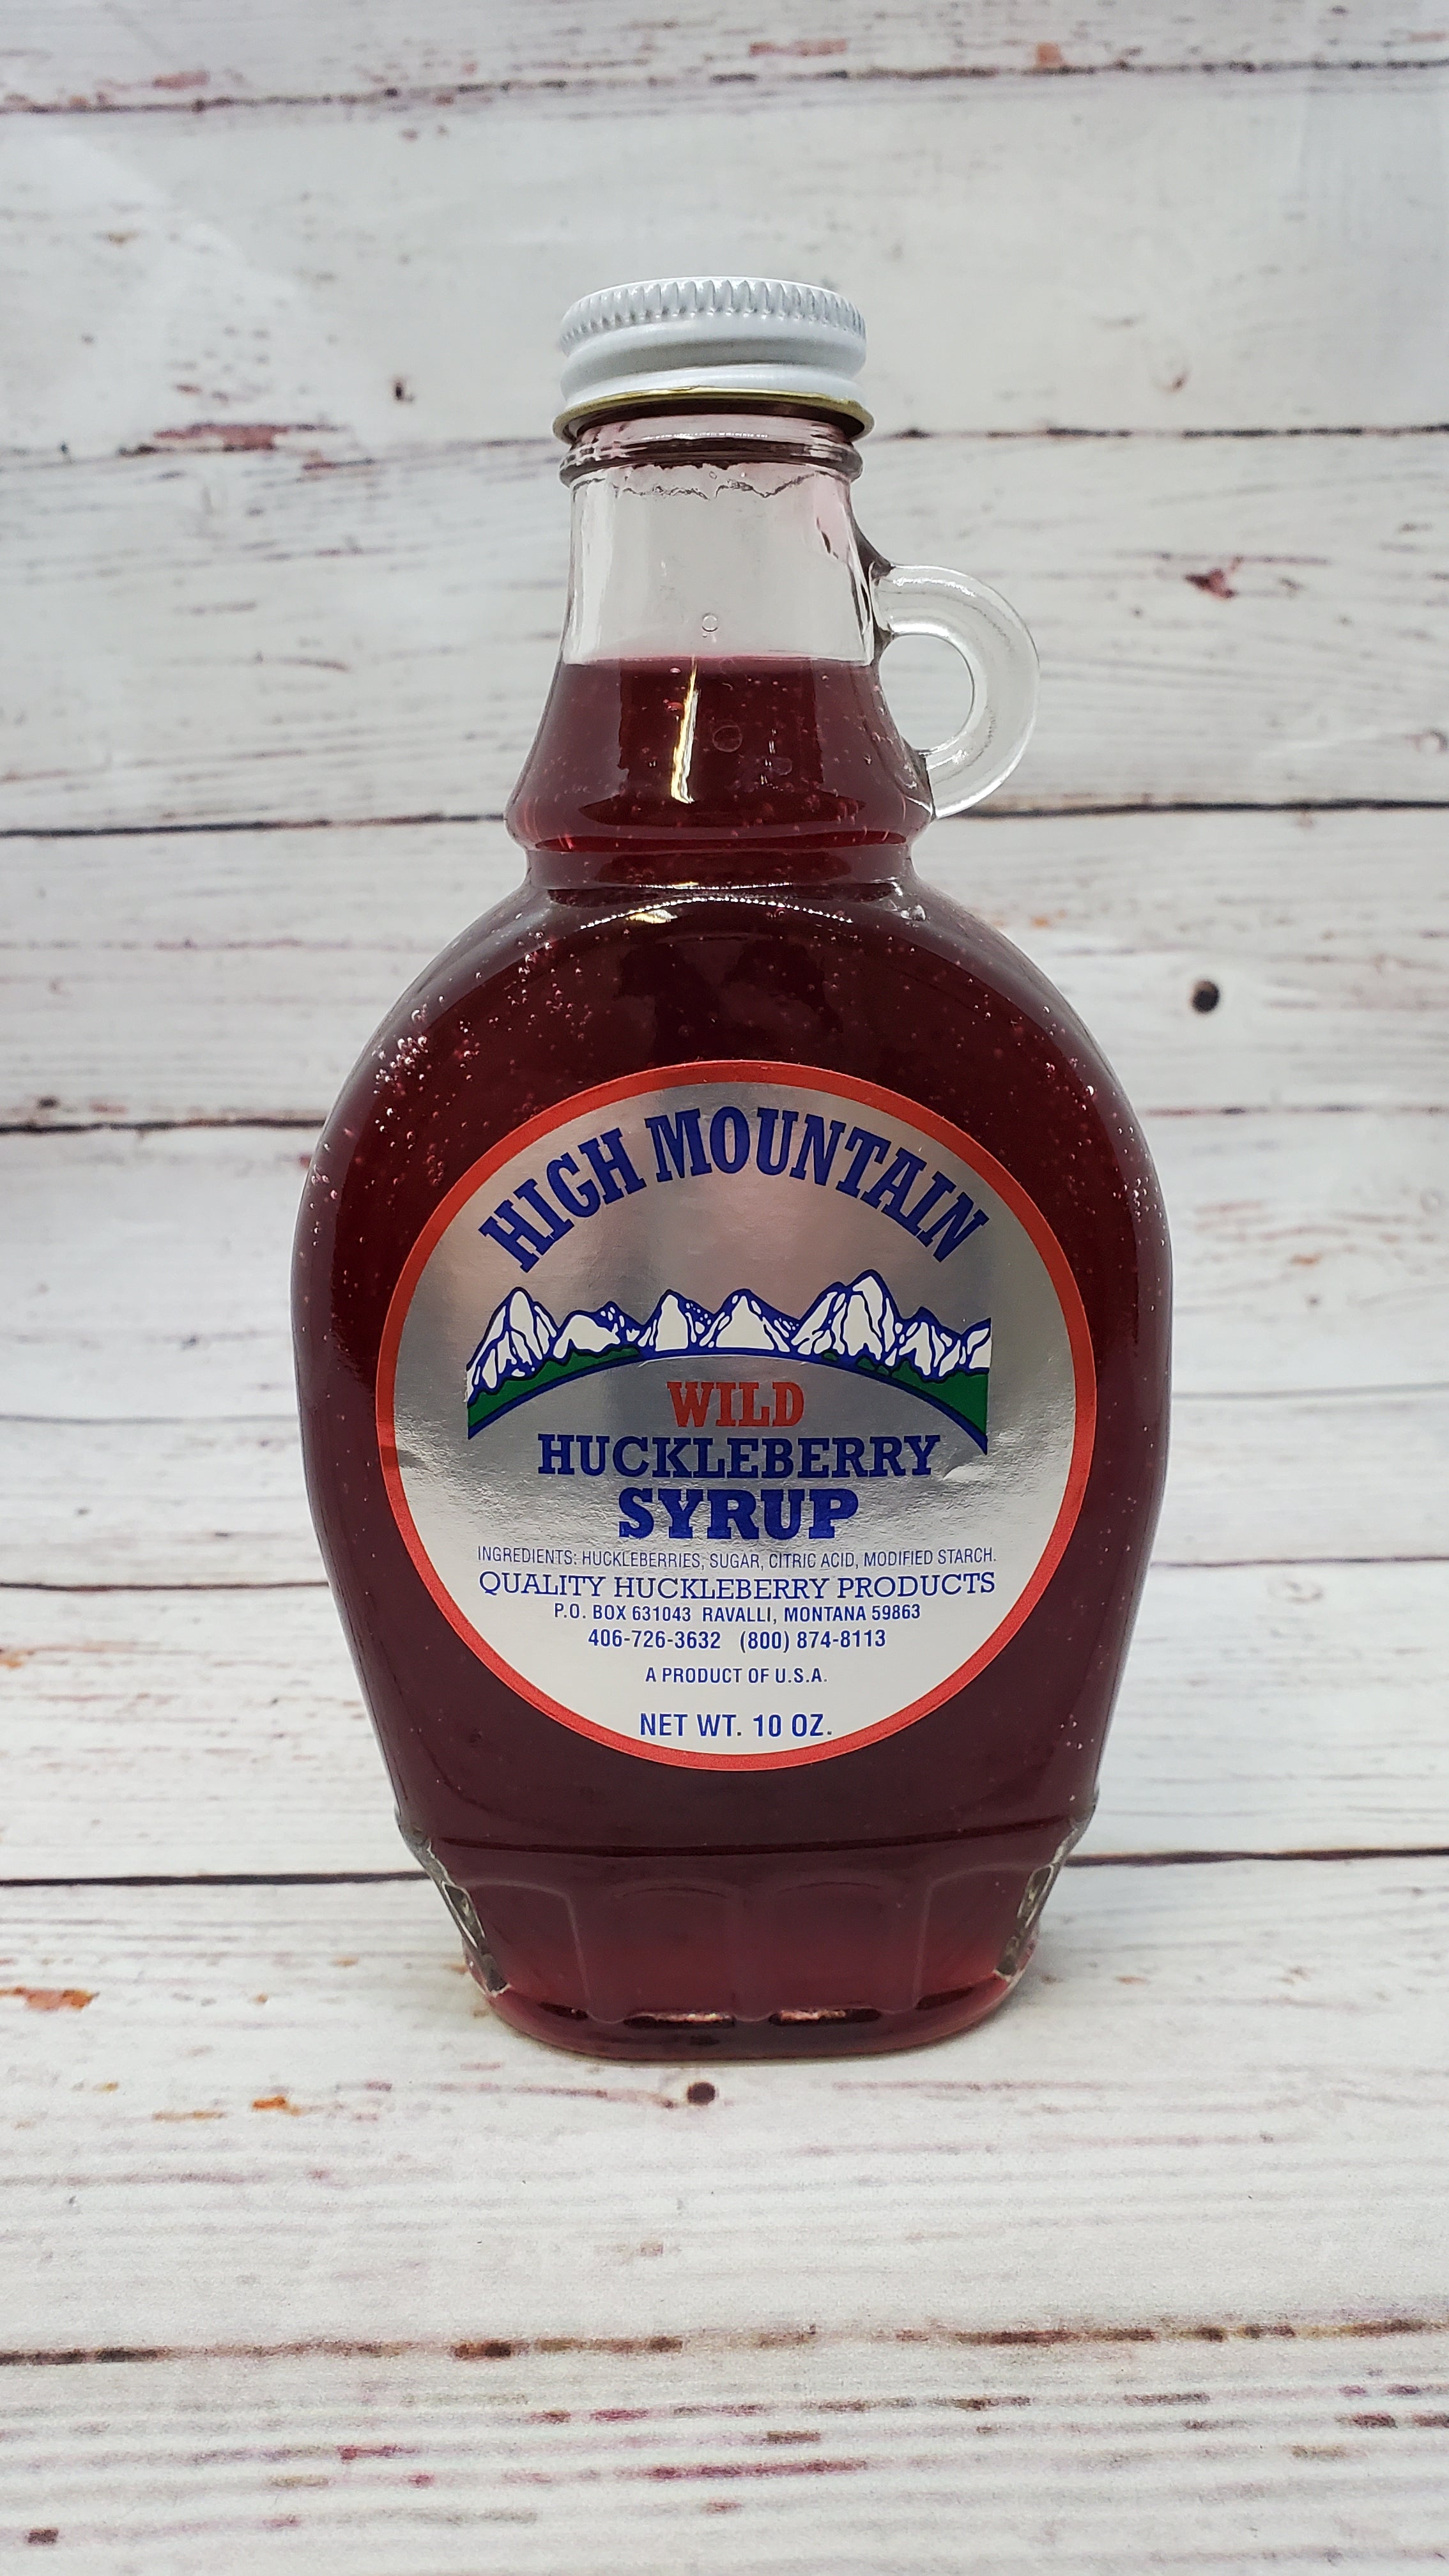 High Mountain Quality Products from Ravalli, Montana Wild huckleberries are a hand-picked mountain delicacy Ingredients:  huckleberries, sugar, citric acid, and modified starch 10 oz glass jar Treat your pancakes, waffles, ice cream and other delights to a flavor blast.  From the beautiful Bitter Root Valley in northwest Montana we get this beloved Montana treat.  Tiny huckleberries grow wild on mountainsides and are treasured by humans and bears alike.  10 oz glass jar.